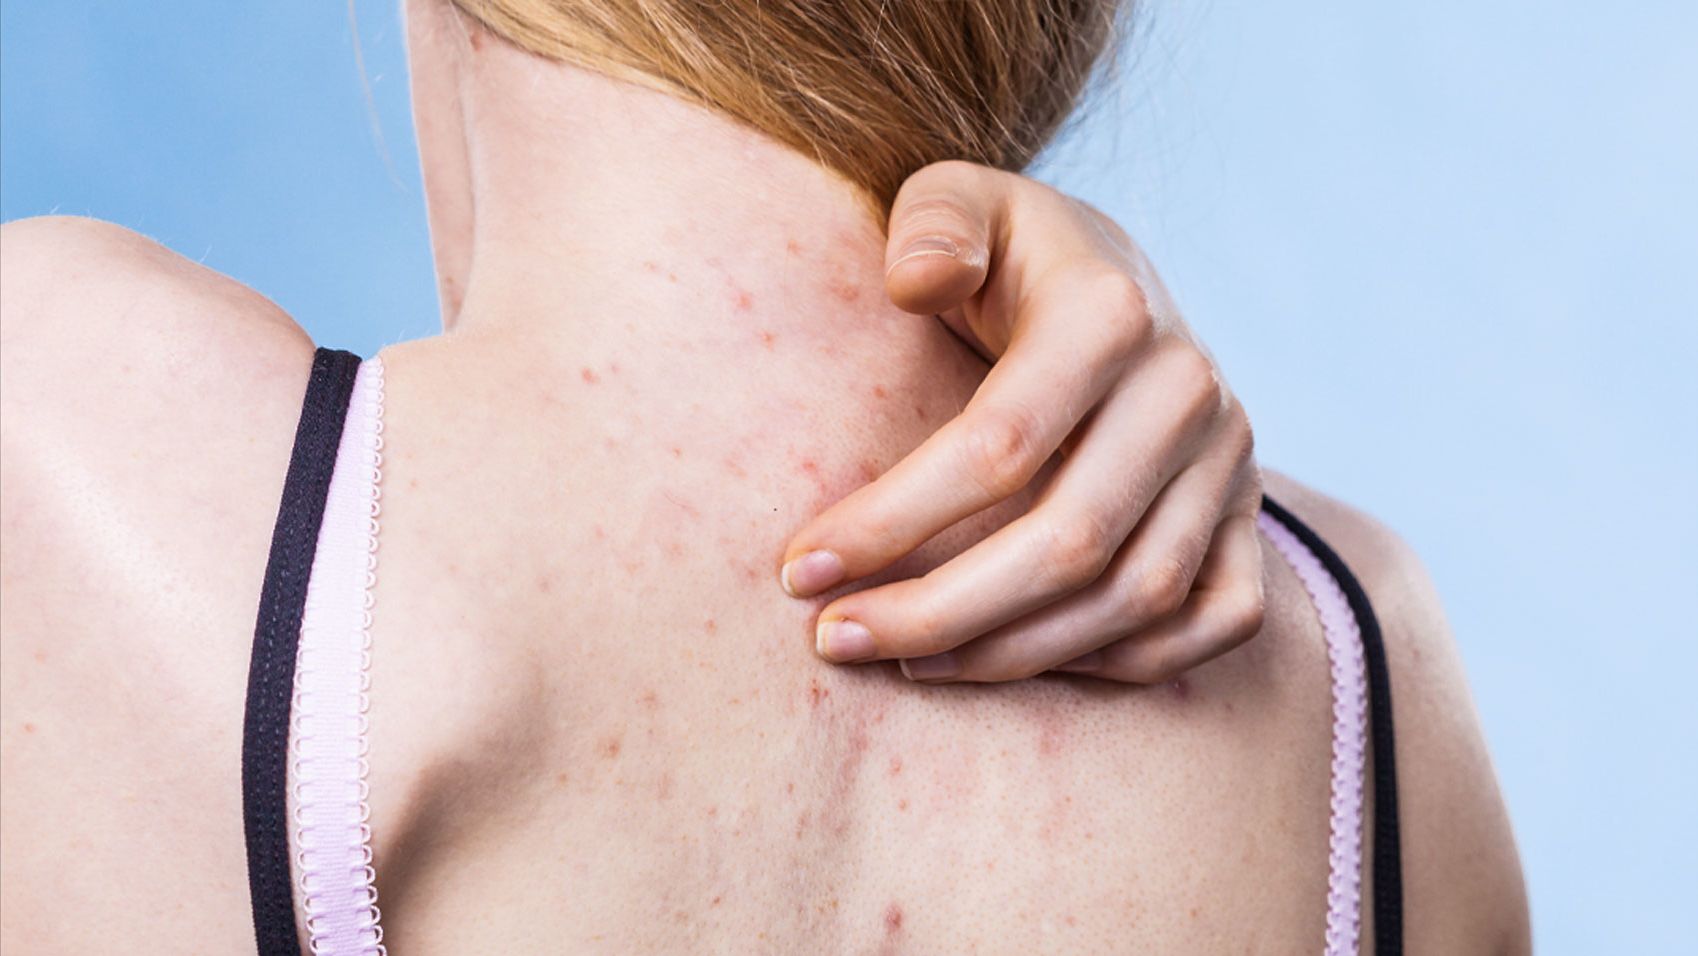 How to get rid of back acne: 15 treatments, washes and sprays for bacne